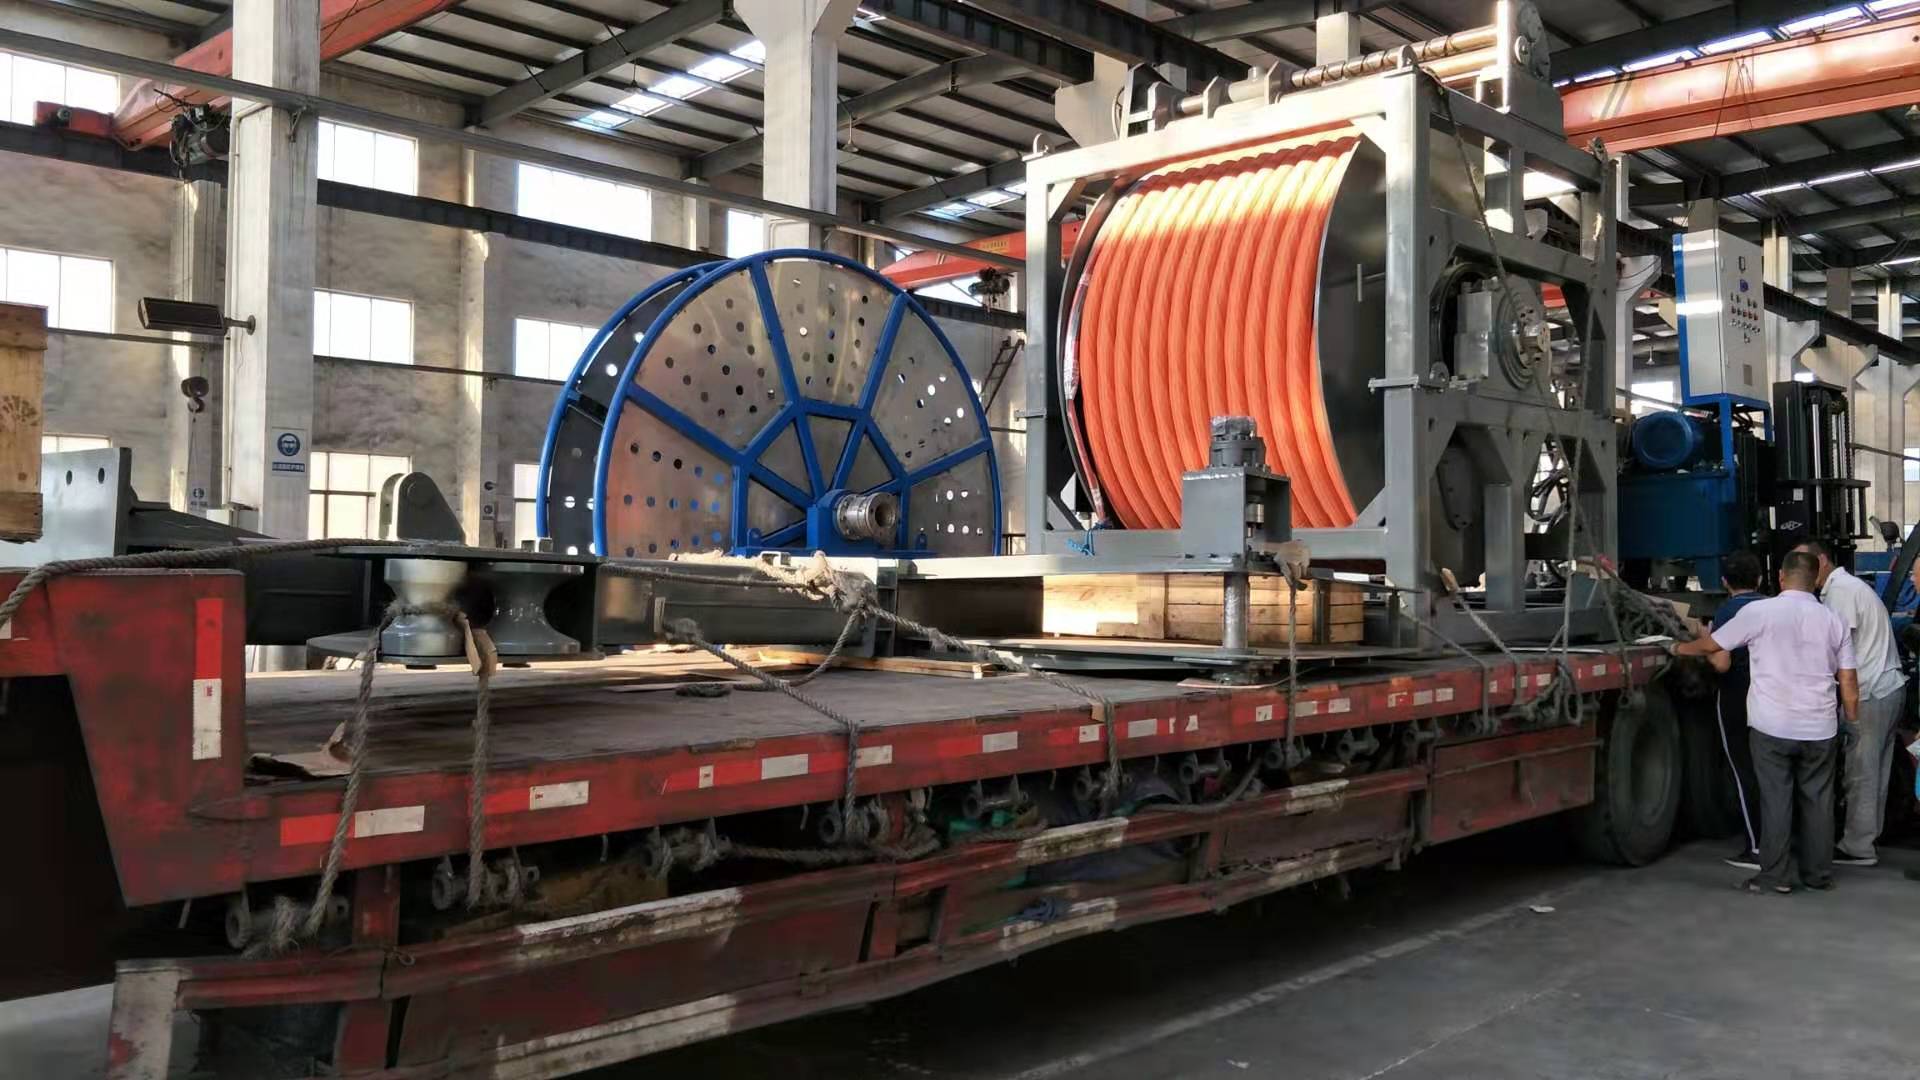 Cable winch and Jib crane have been sent to Yantai.